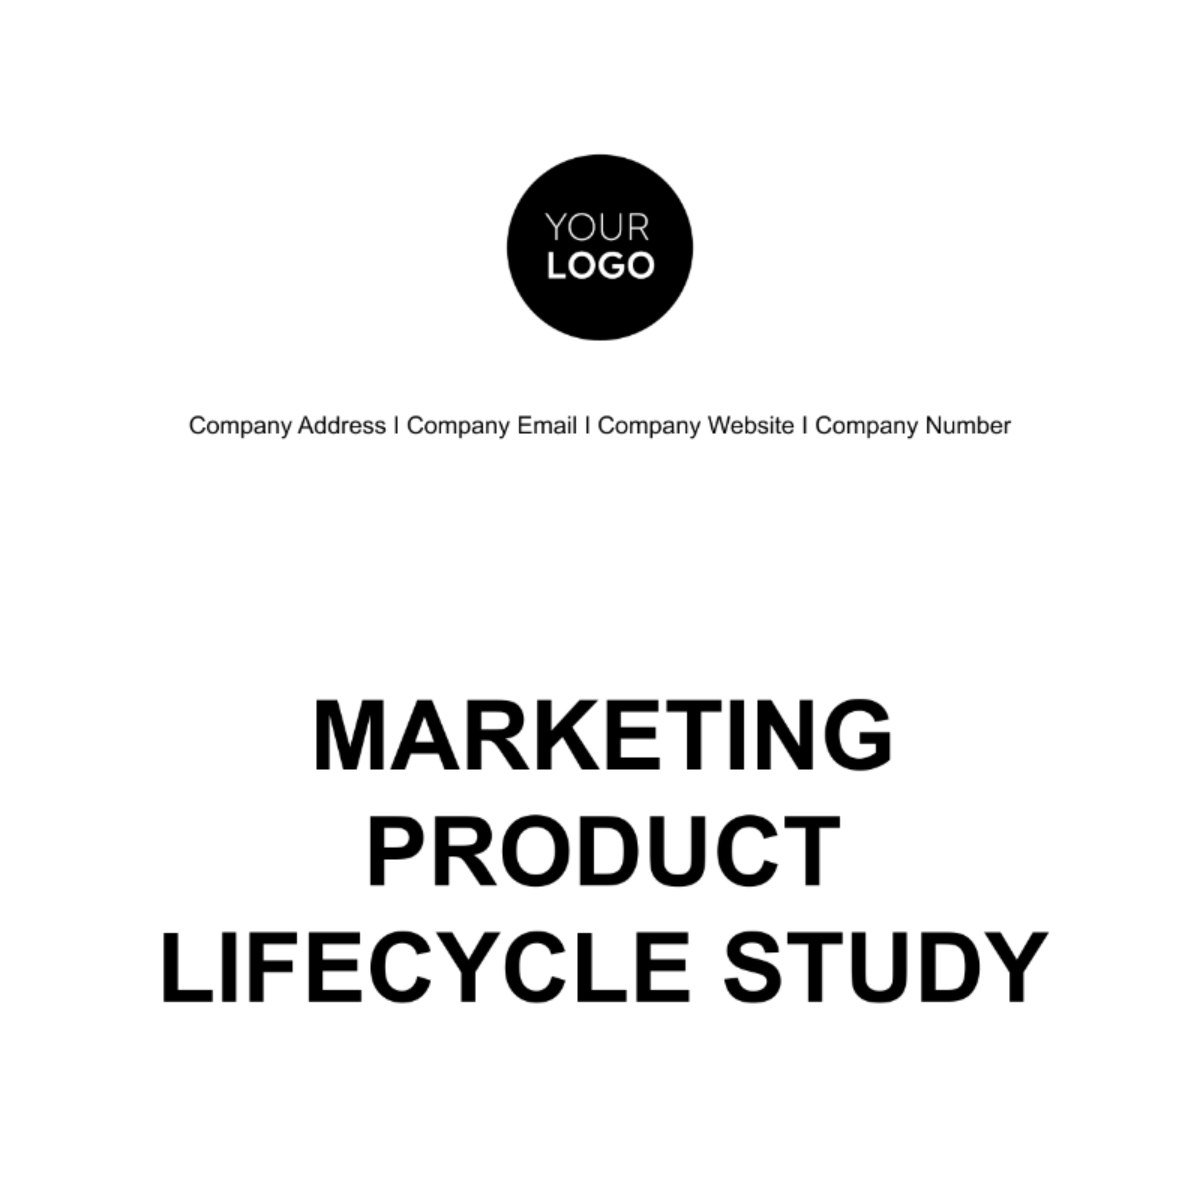 Marketing Product Lifecycle Study Template